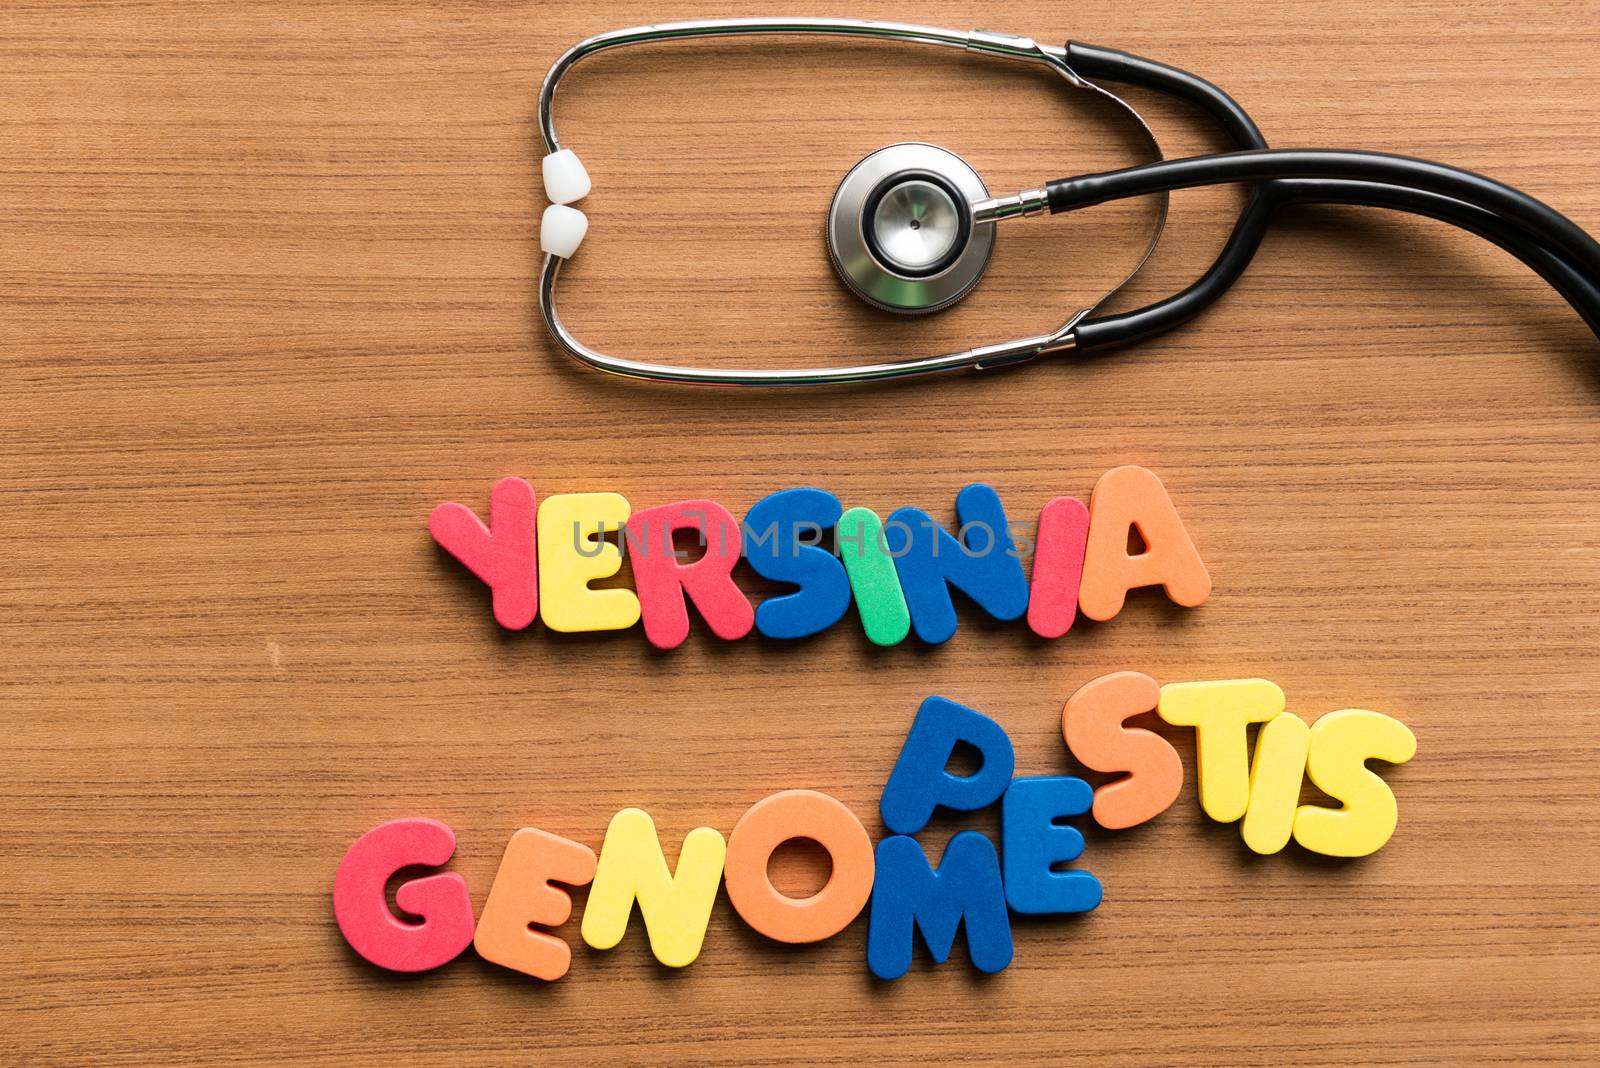 yersinia pestis genome colorful word with stethoscope on wooden background